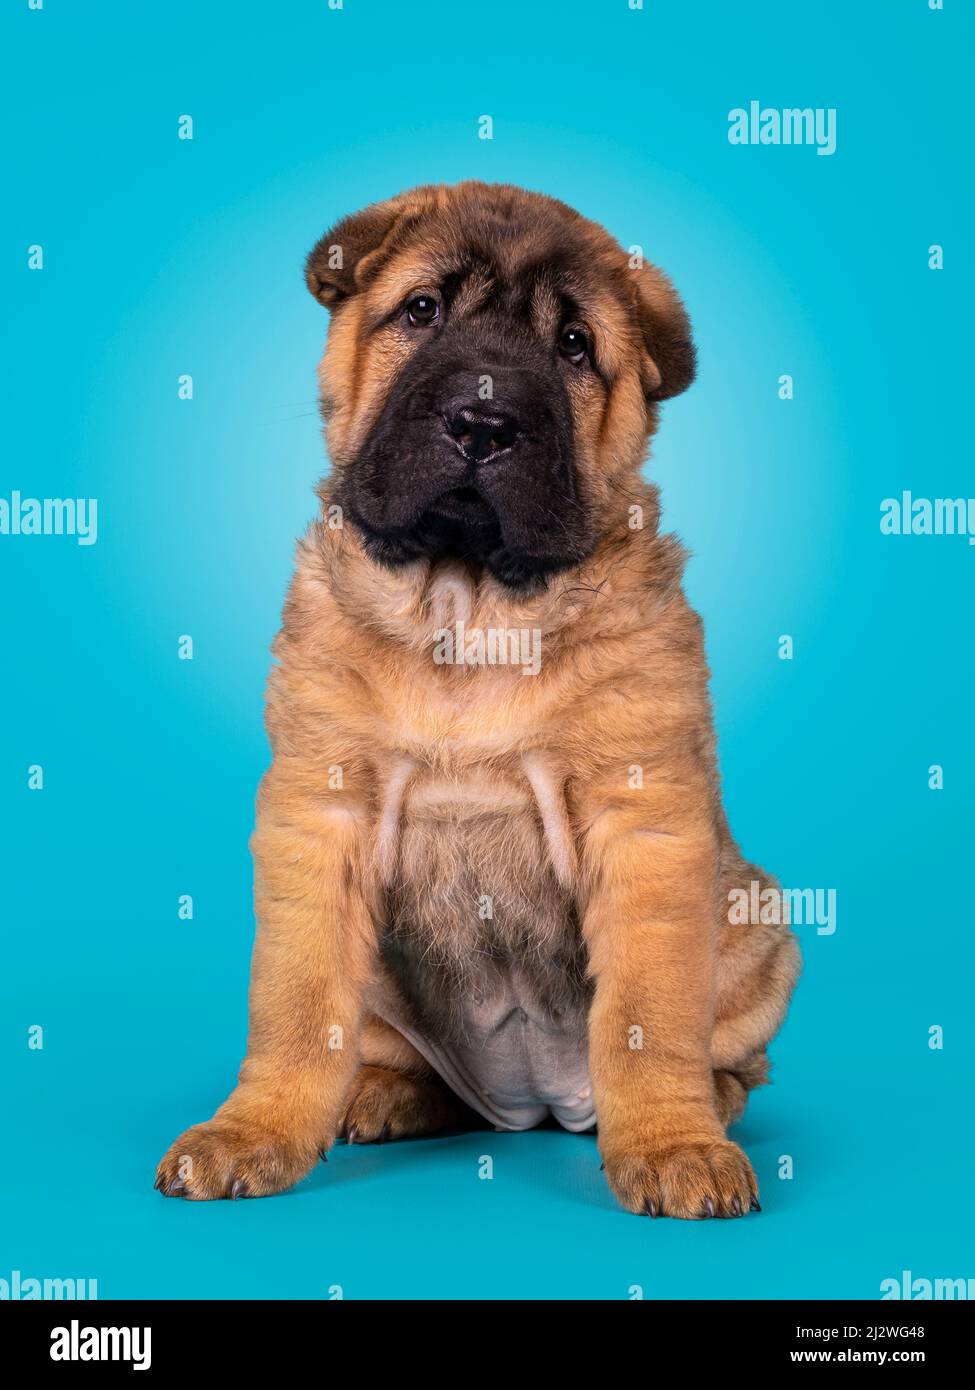 Adorable Shar-pei dog pup, sitting up facing front. Looking towards camera with cute droopy eyes. Isolated on a turquoise blue background. Stock Photo